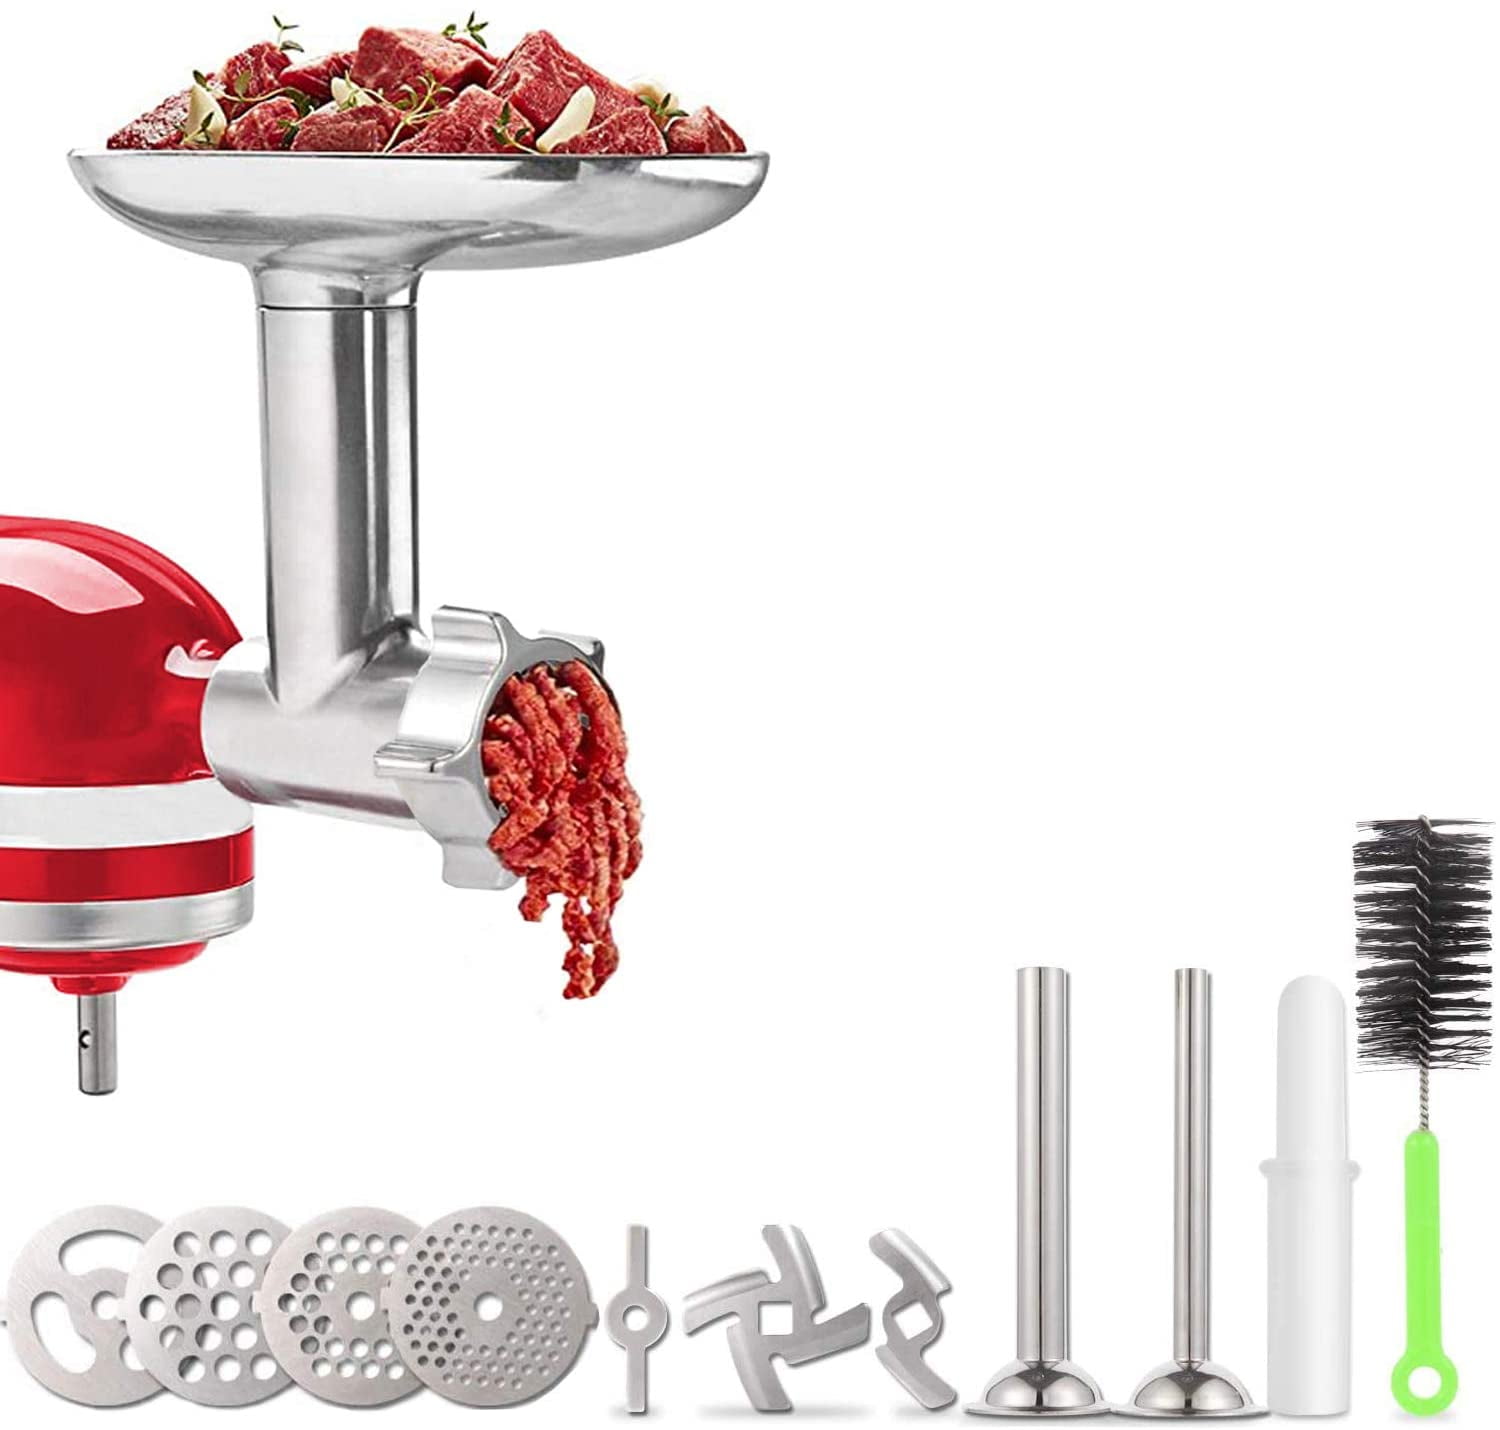 KITCHTREE Meat Grinder Attachment for KitchenAid Stand Mixers